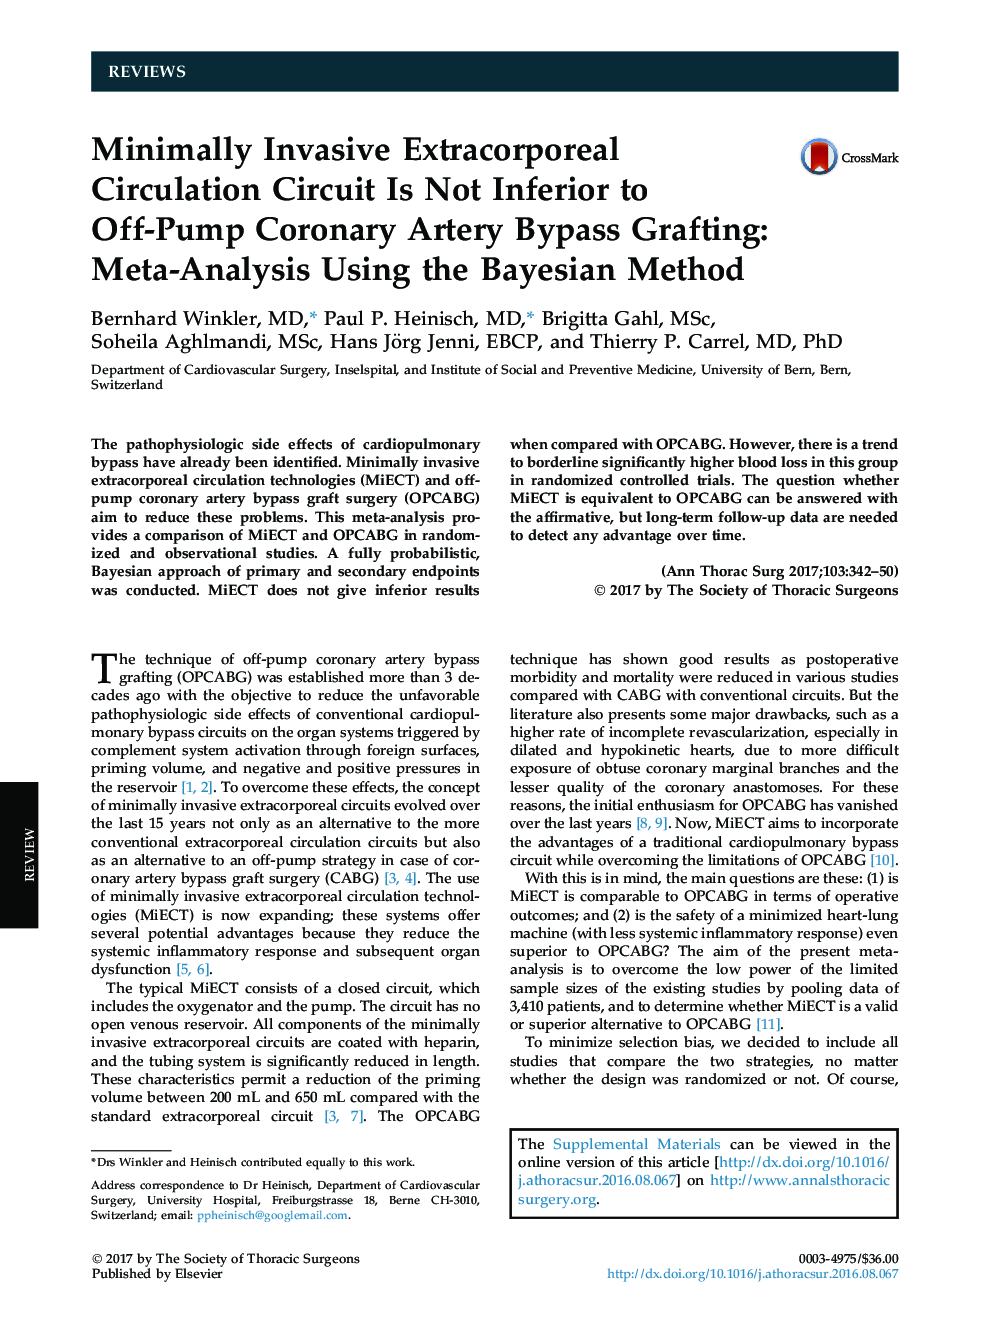 Minimally Invasive Extracorporeal Circulation Circuit Is Not Inferior to Off-Pump Coronary Artery Bypass Grafting: Meta-Analysis Using the Bayesian Method